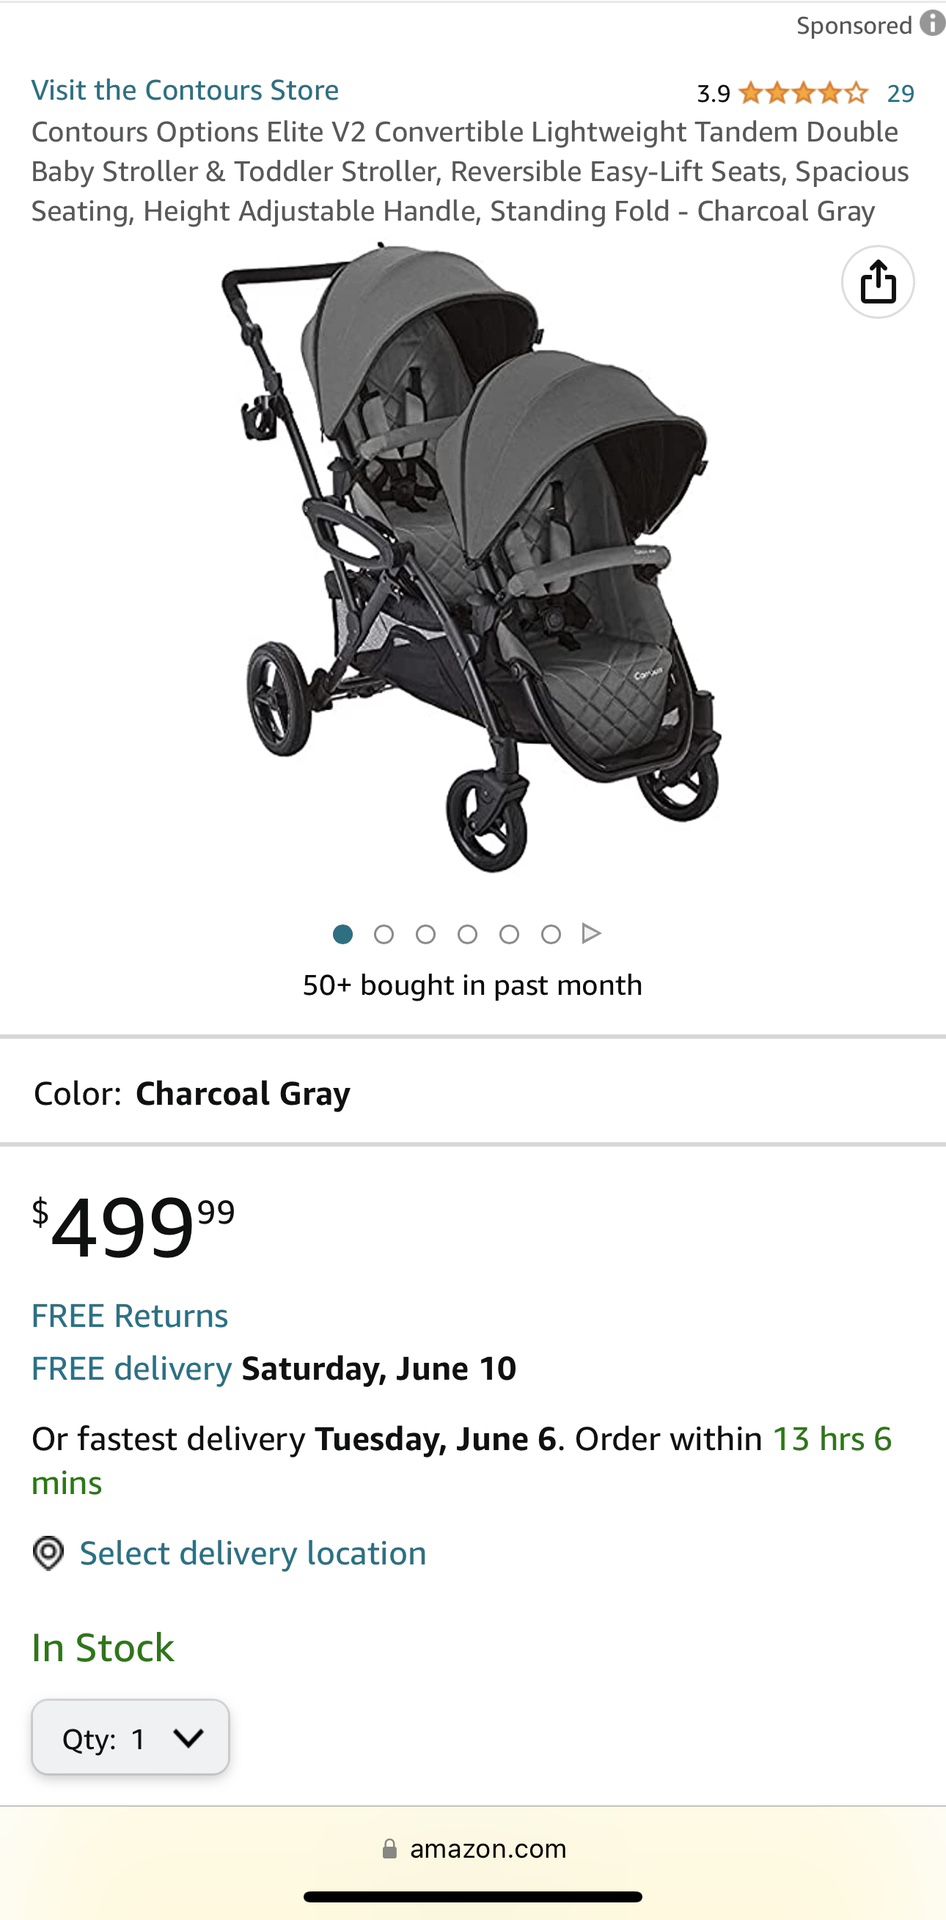 Contours Options Elite Convertible Lightweight Tandem Double Baby Stroller & Toddler Stroller, Reversible Easy-Lift Seats, Spacious Seating